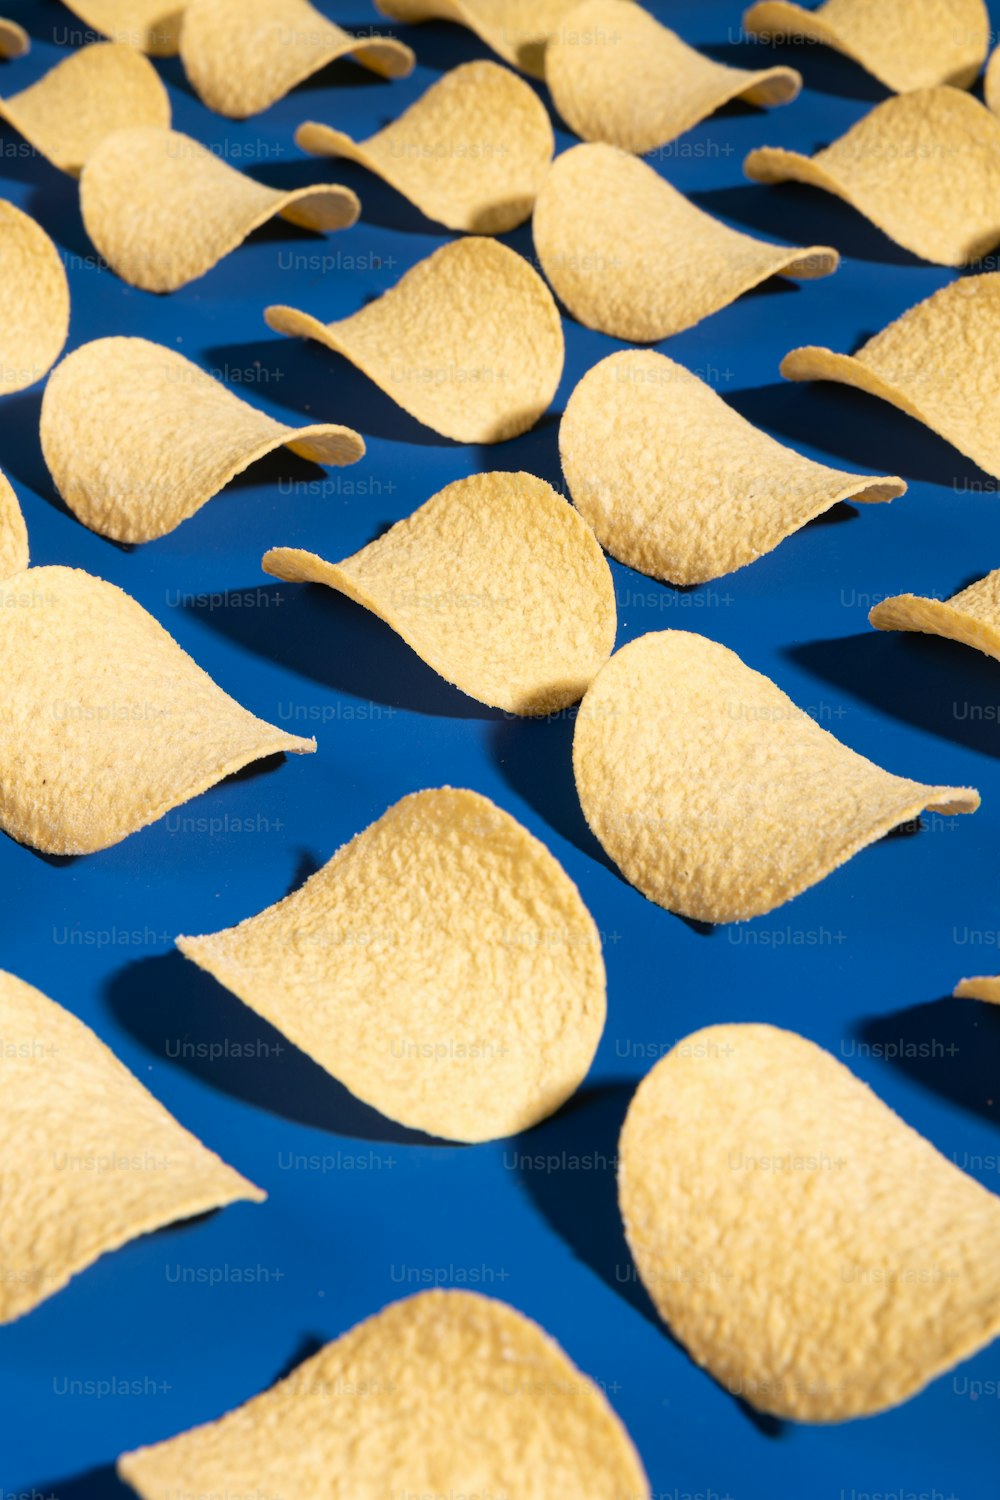 tortilla chips are arranged on a blue surface